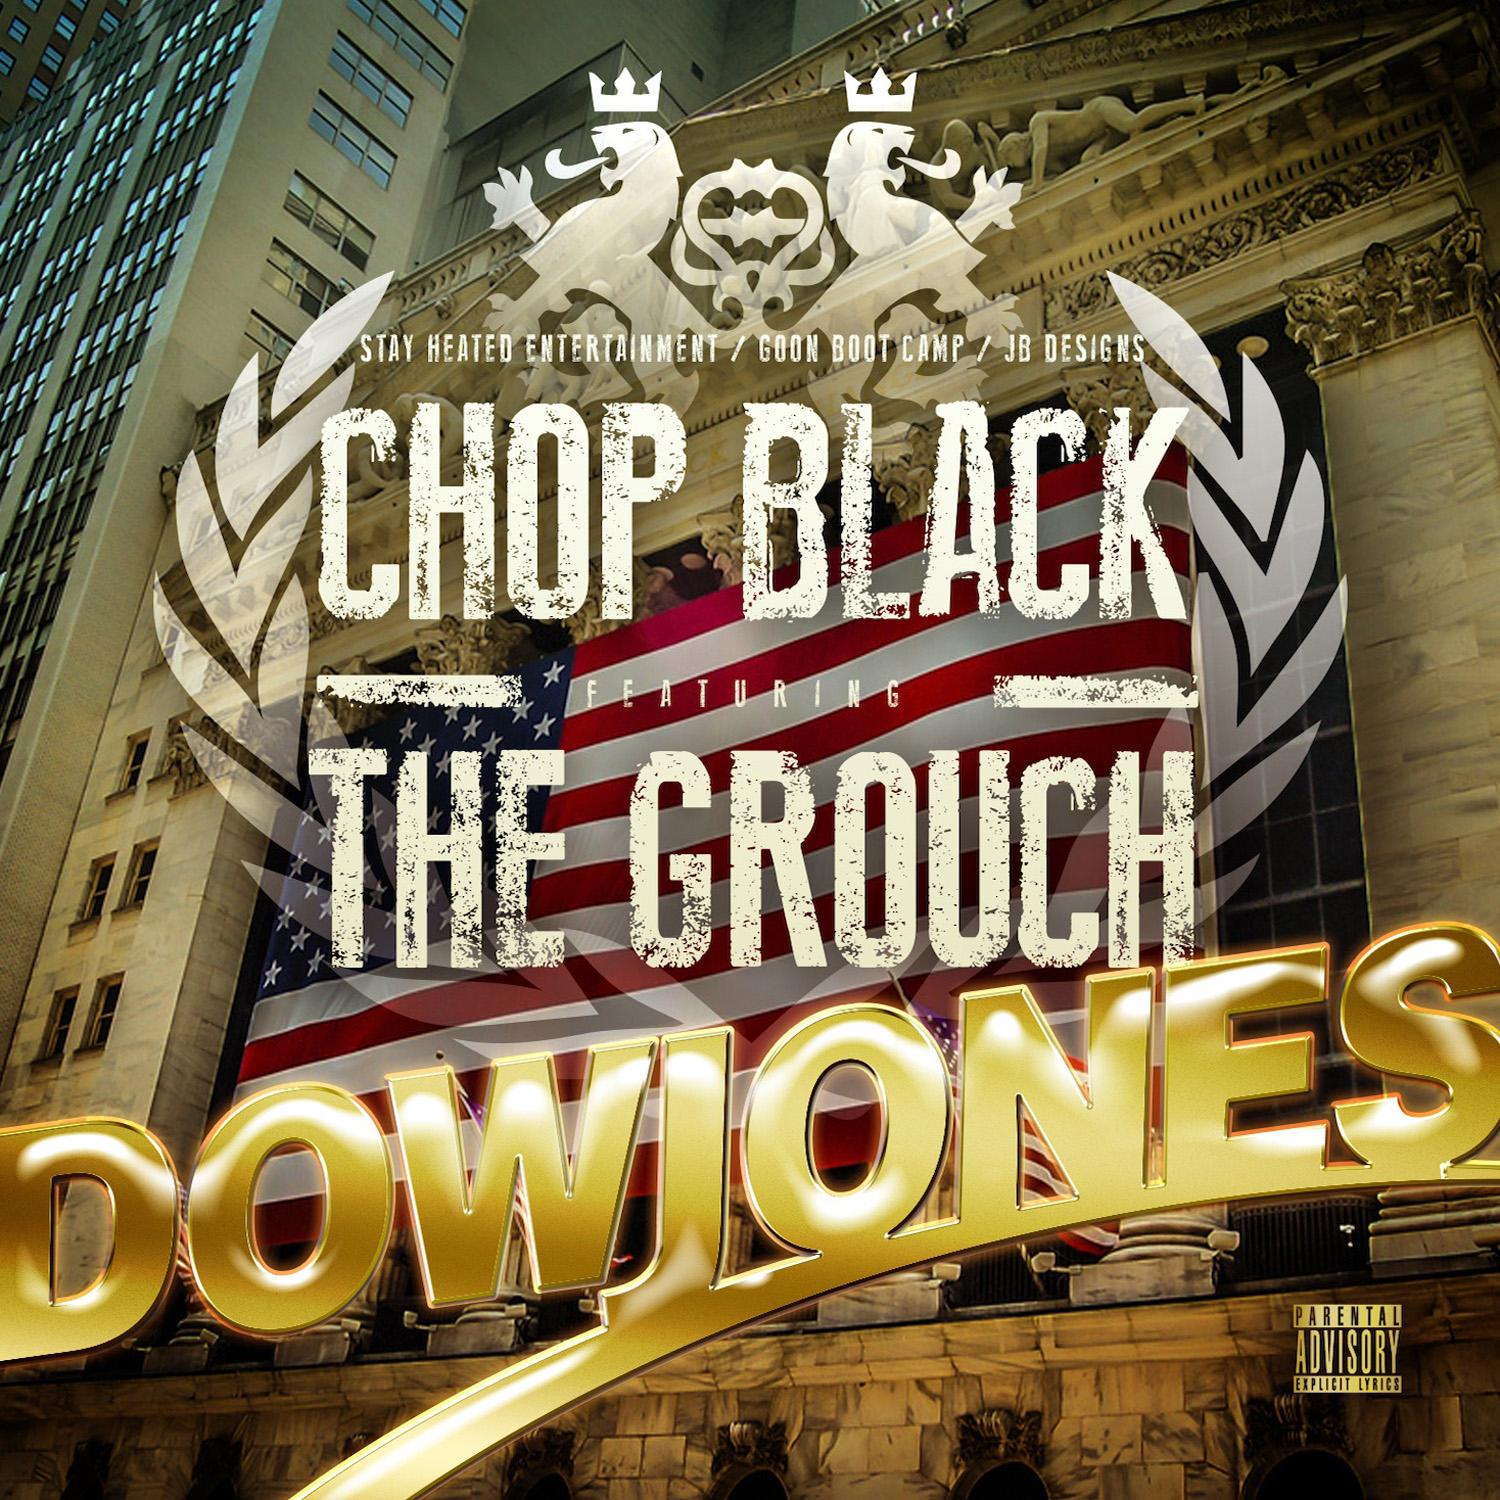 Dow Jones (feat. The Grouch) - Single